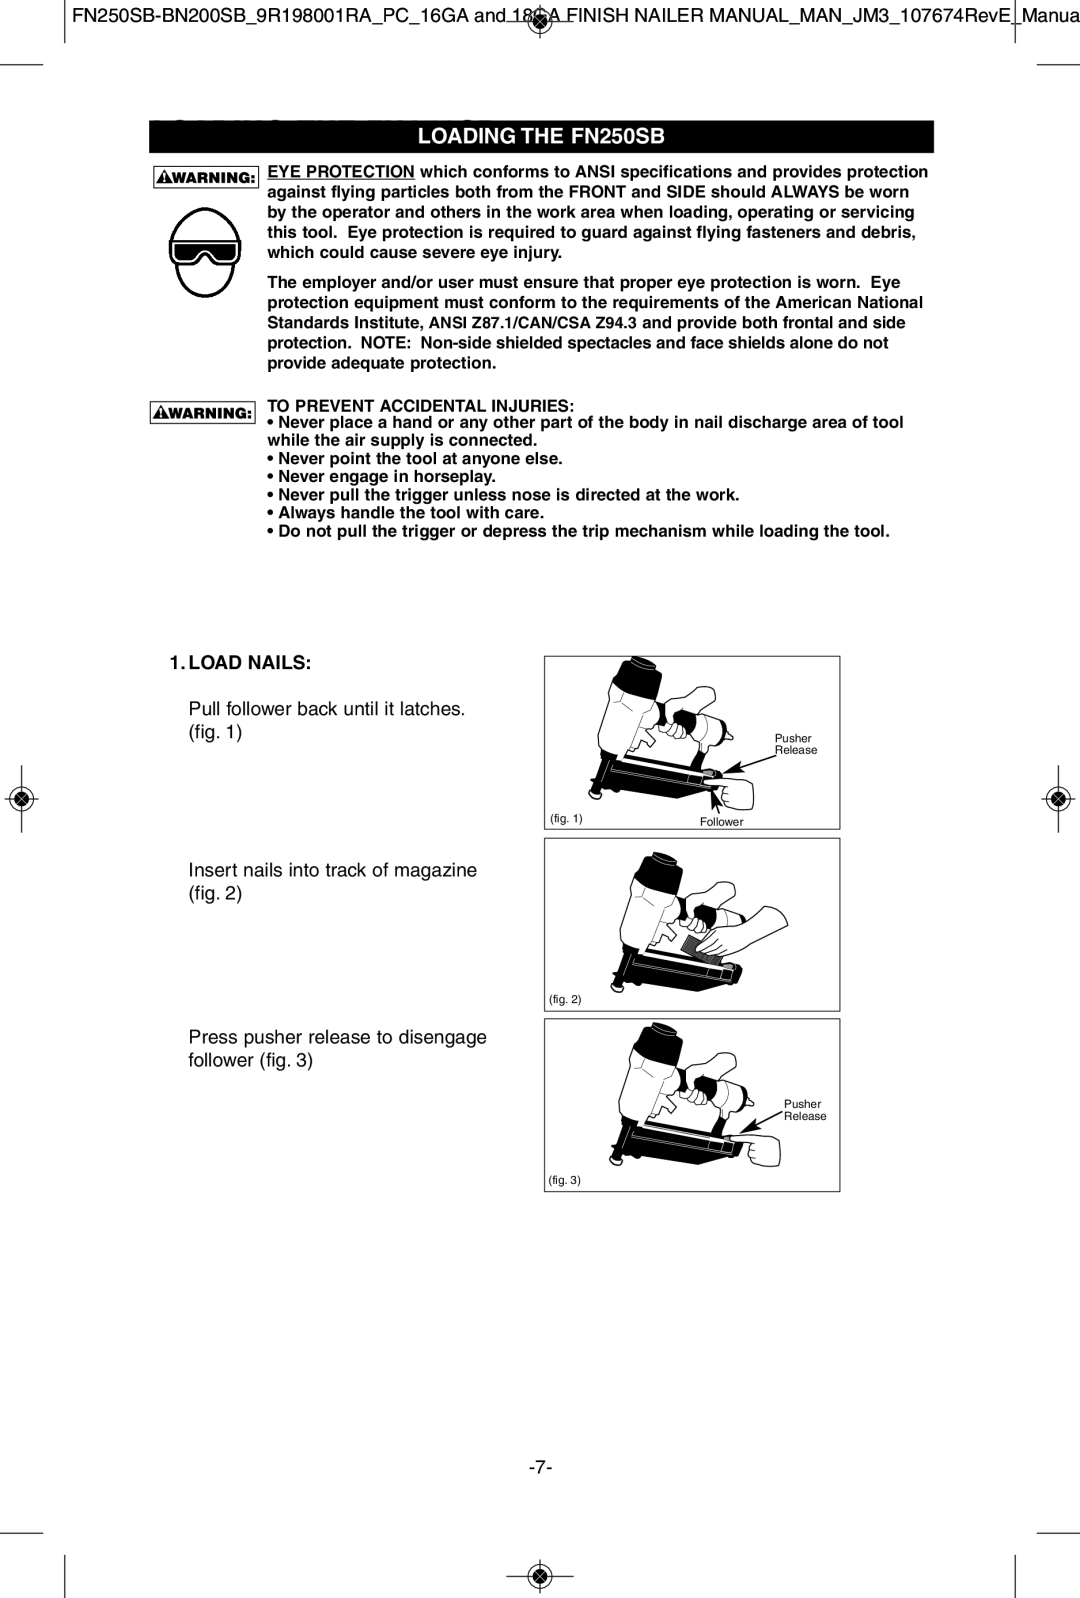 Porter-Cable BN200SB instruction manual Loading the FN250SBLOADING the FN250SB, Load Nails 